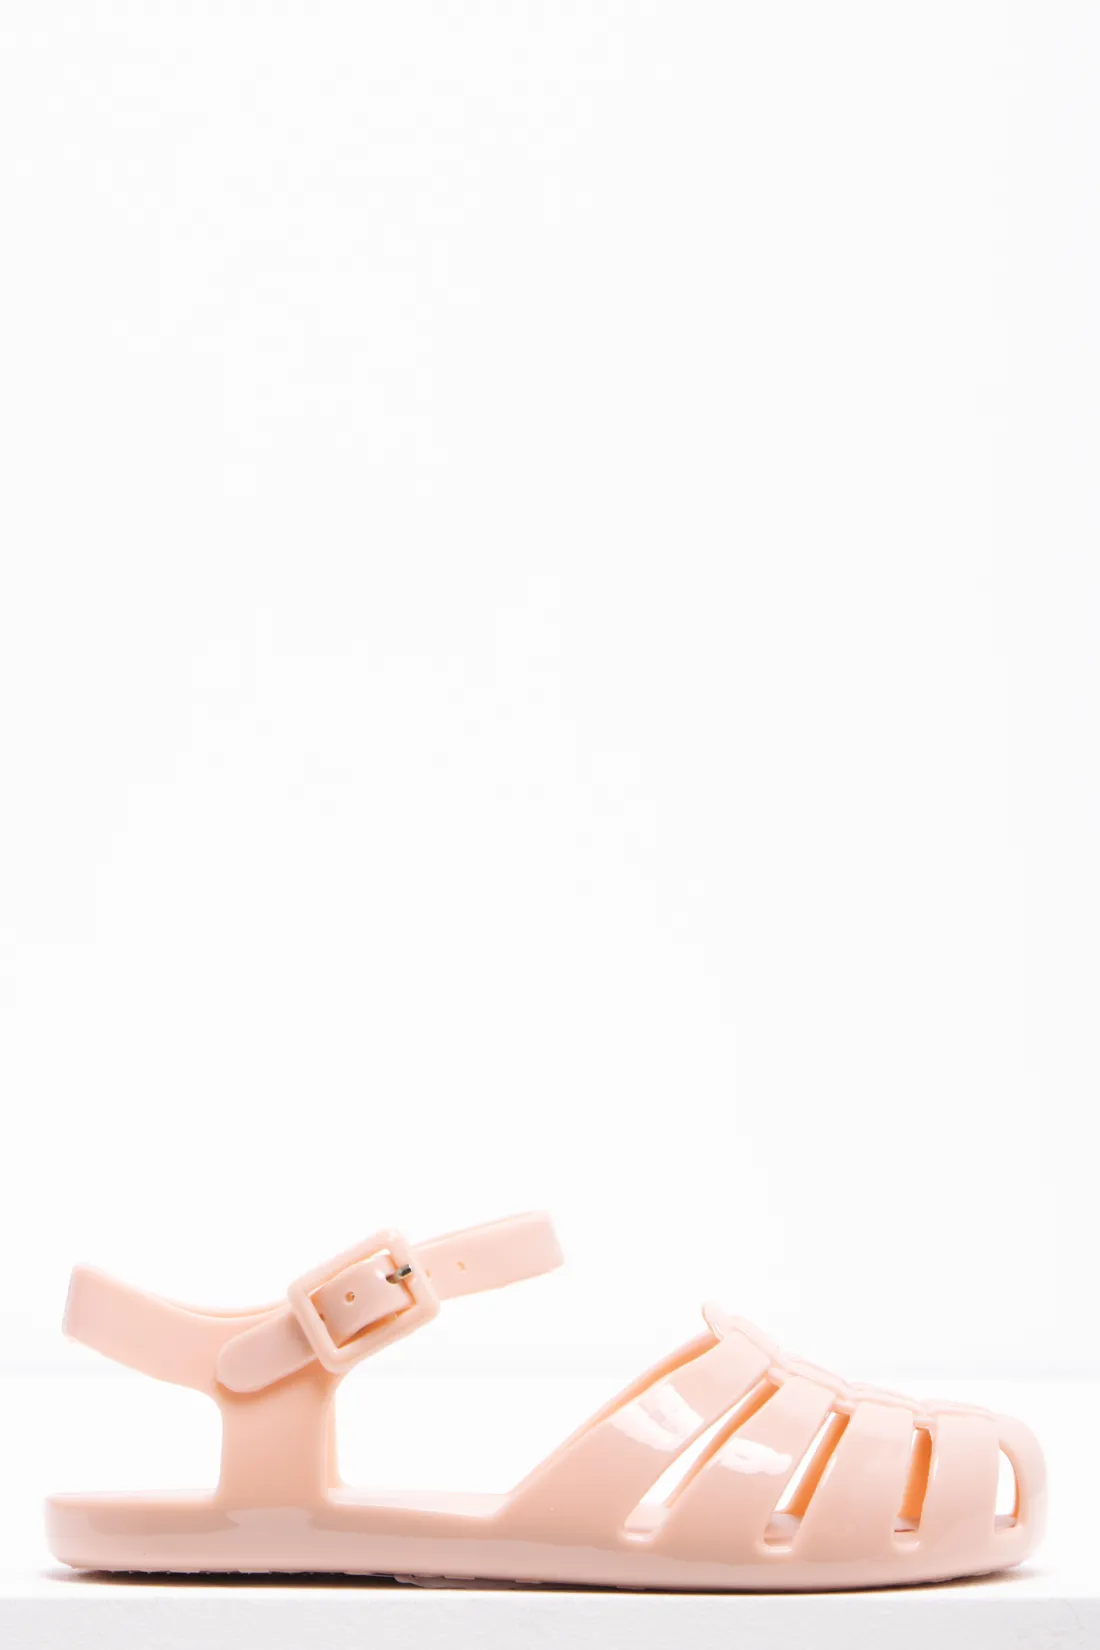 Jelly Sandal Pink Girls 2 10 Years Shoes Ackermans